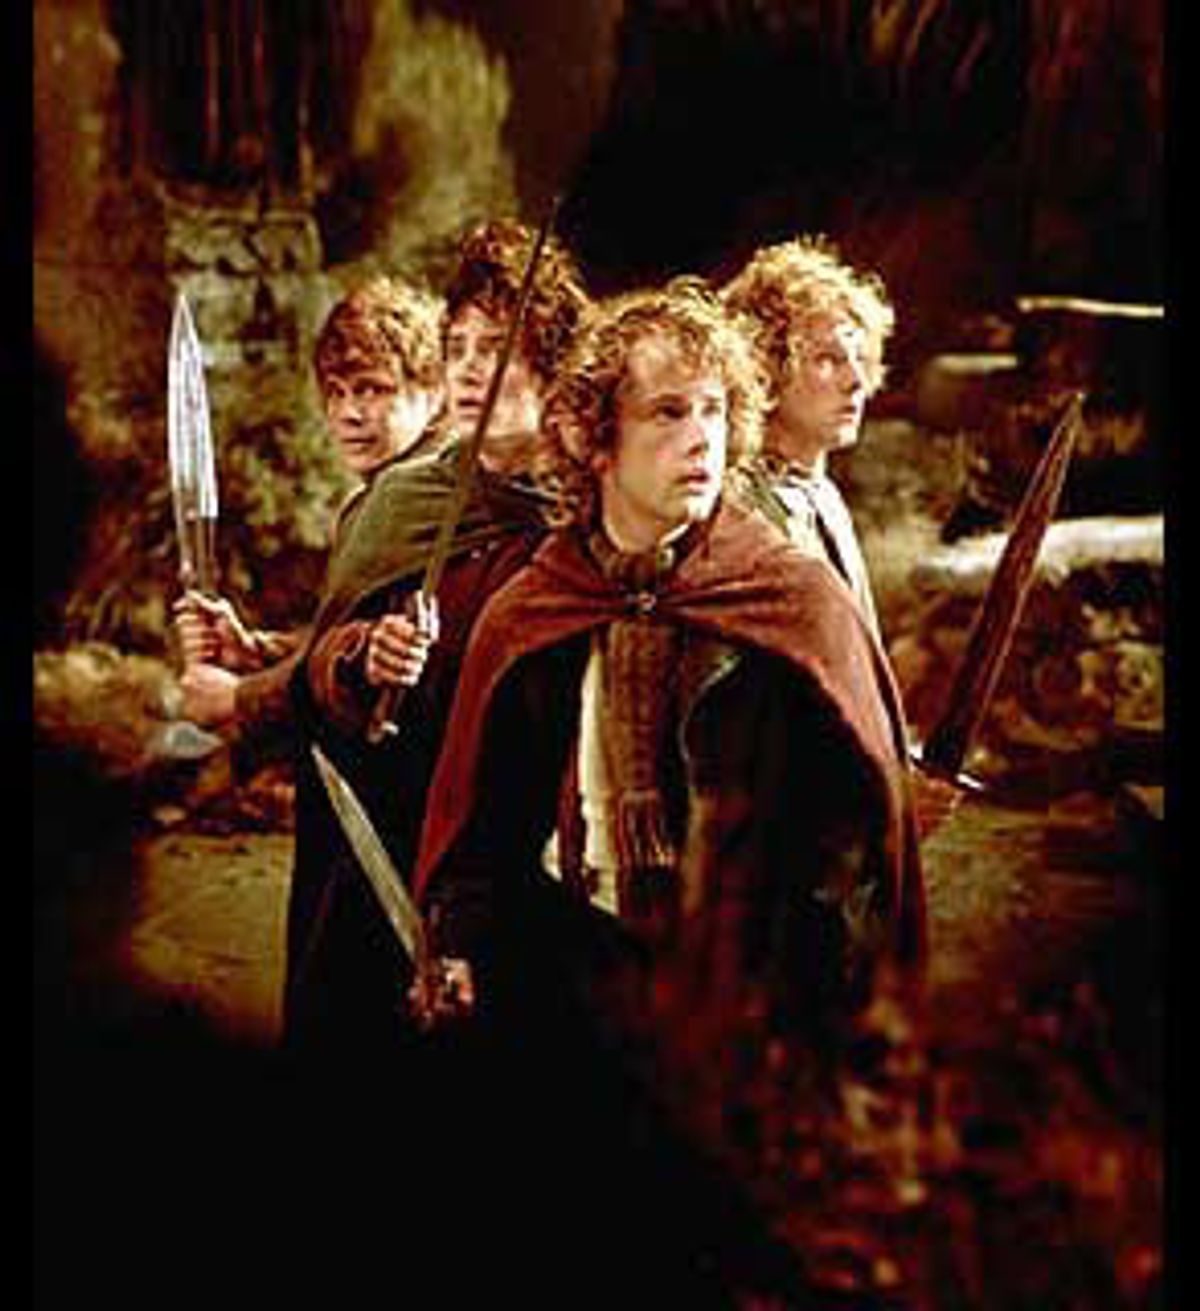 Movie Review: Fellowship of the Ring again (2001)